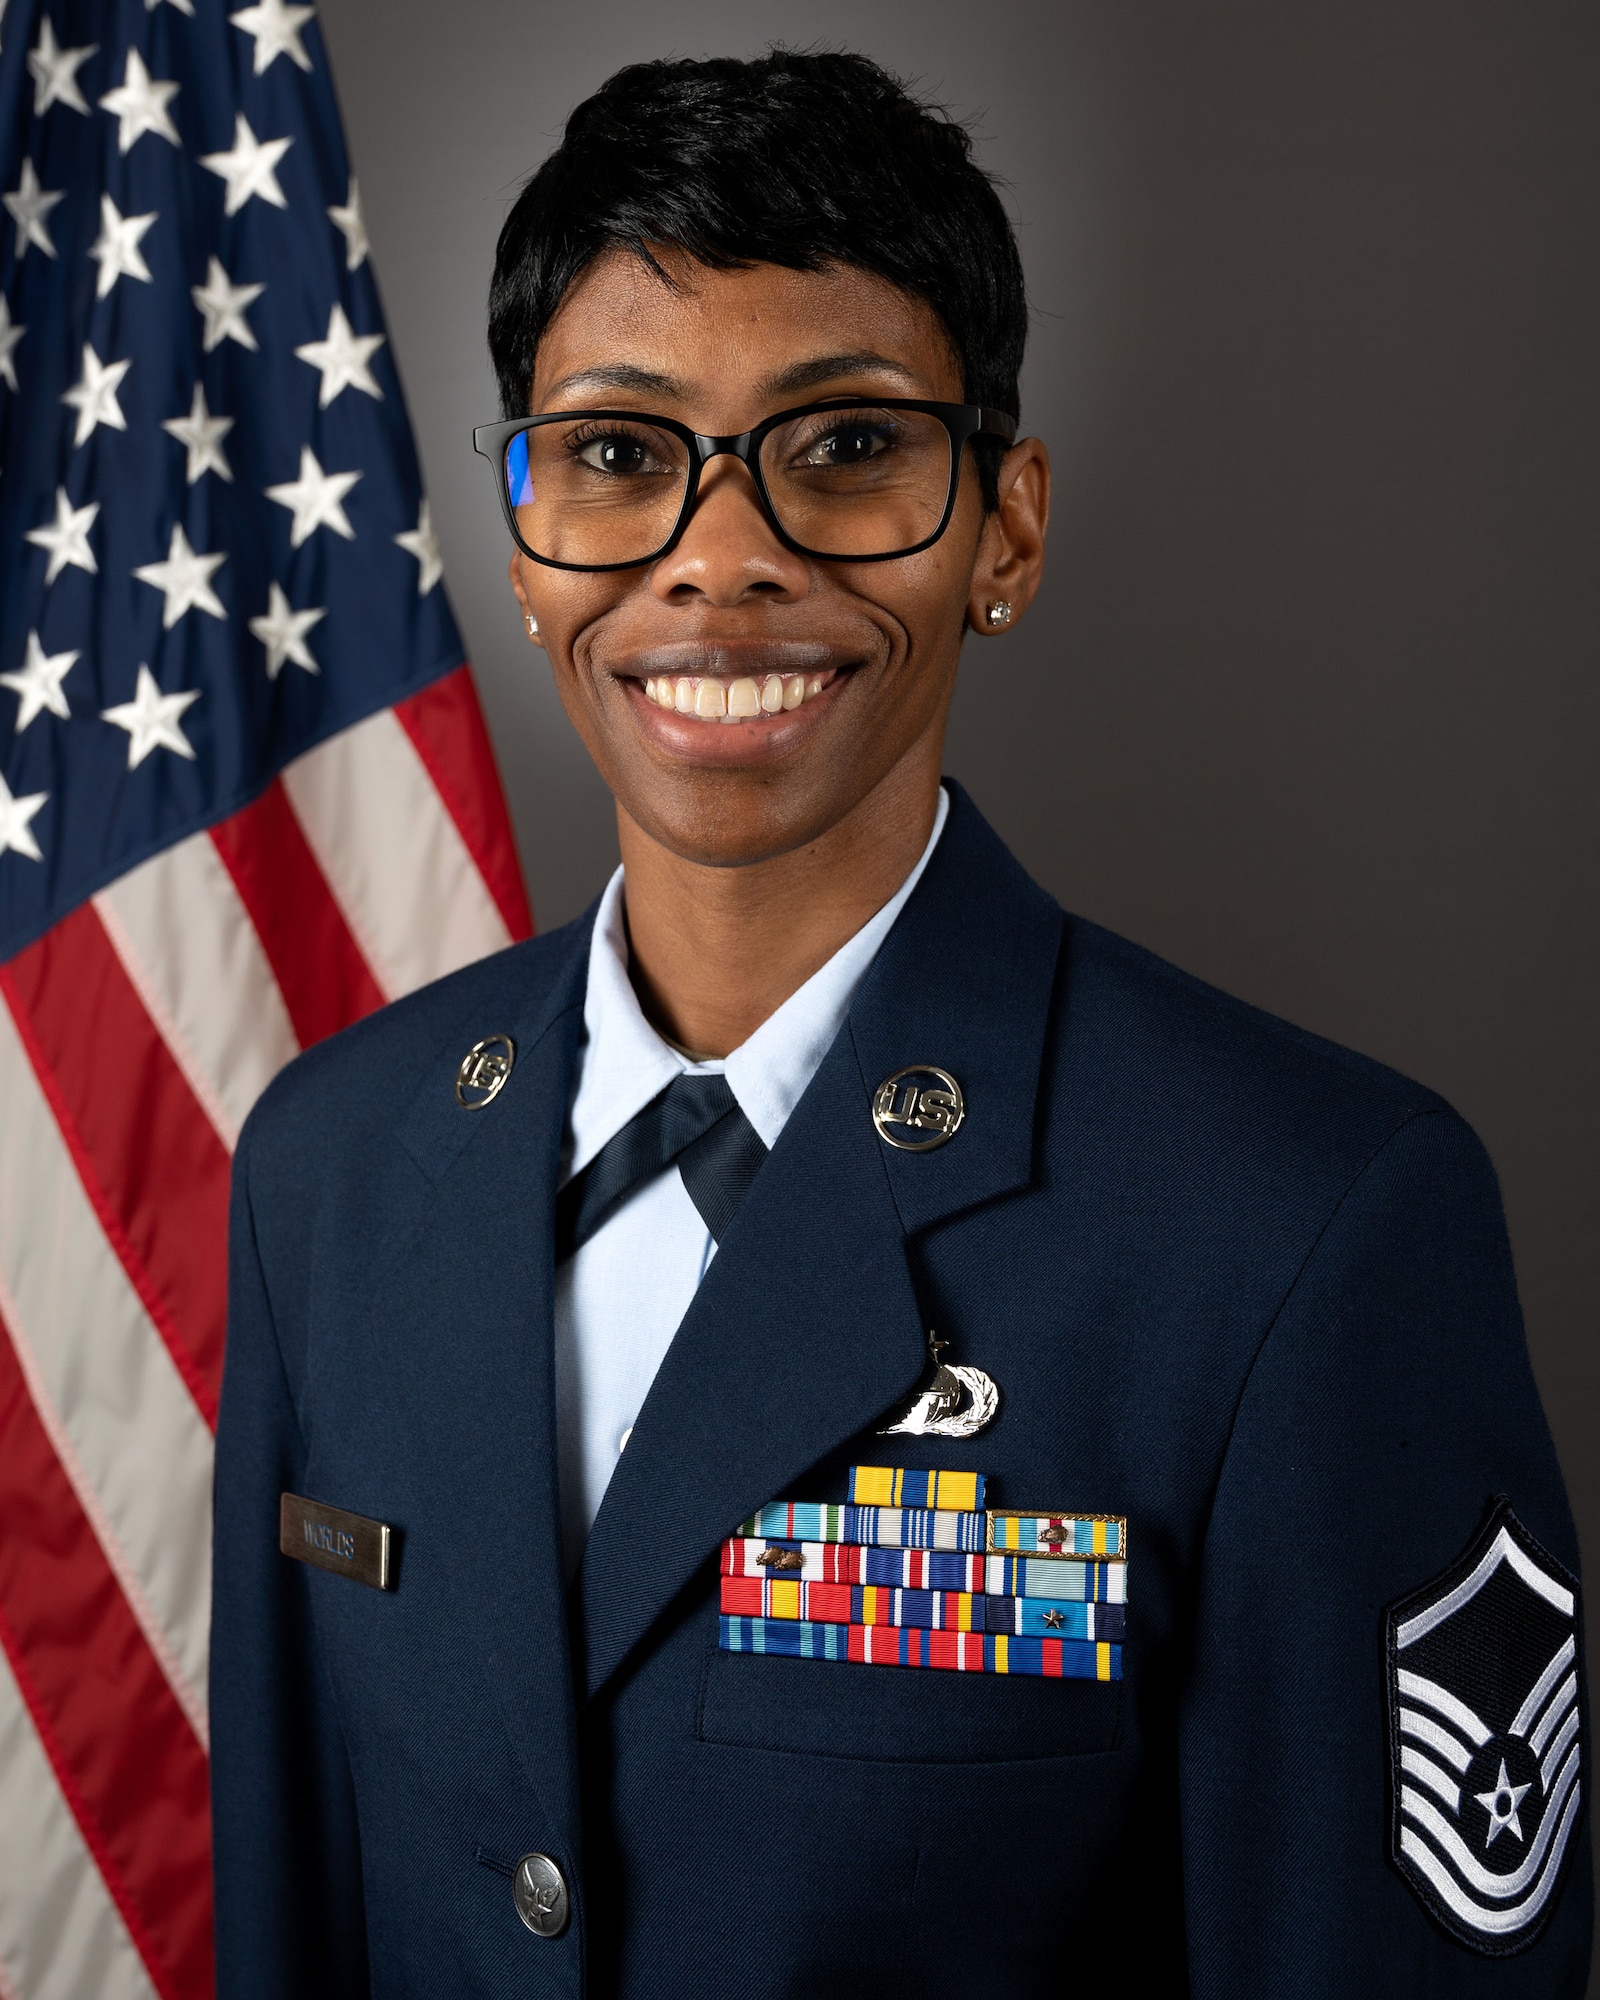 Ms. Latoria Worlds, 42nd Intelligence Squadron, is the 655th Intelligence, Surveillance and Reconnaissance (ISR) Wing quarterly award winner, 2nd quarter.